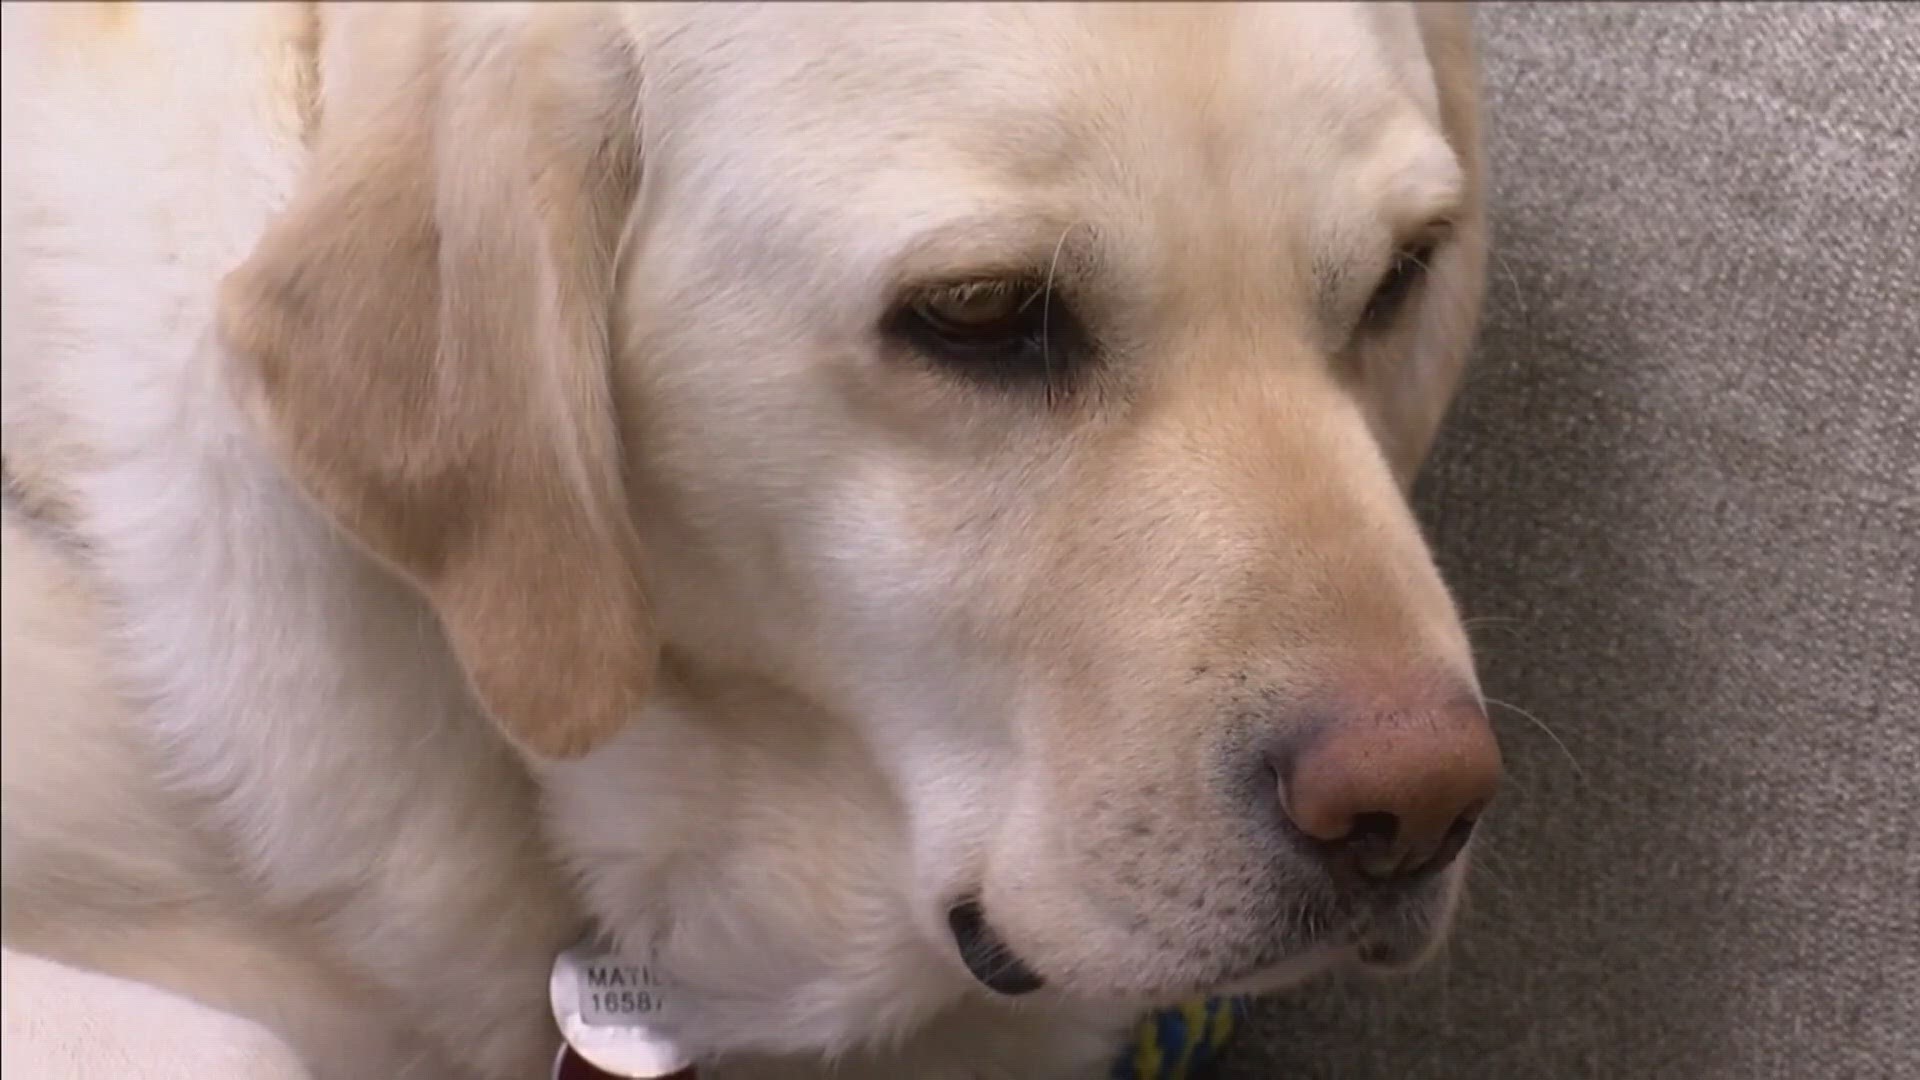 A bill proposed in the Maine Senate aims to allow the use of courthouse comfort dogs, particularly with children in mind.